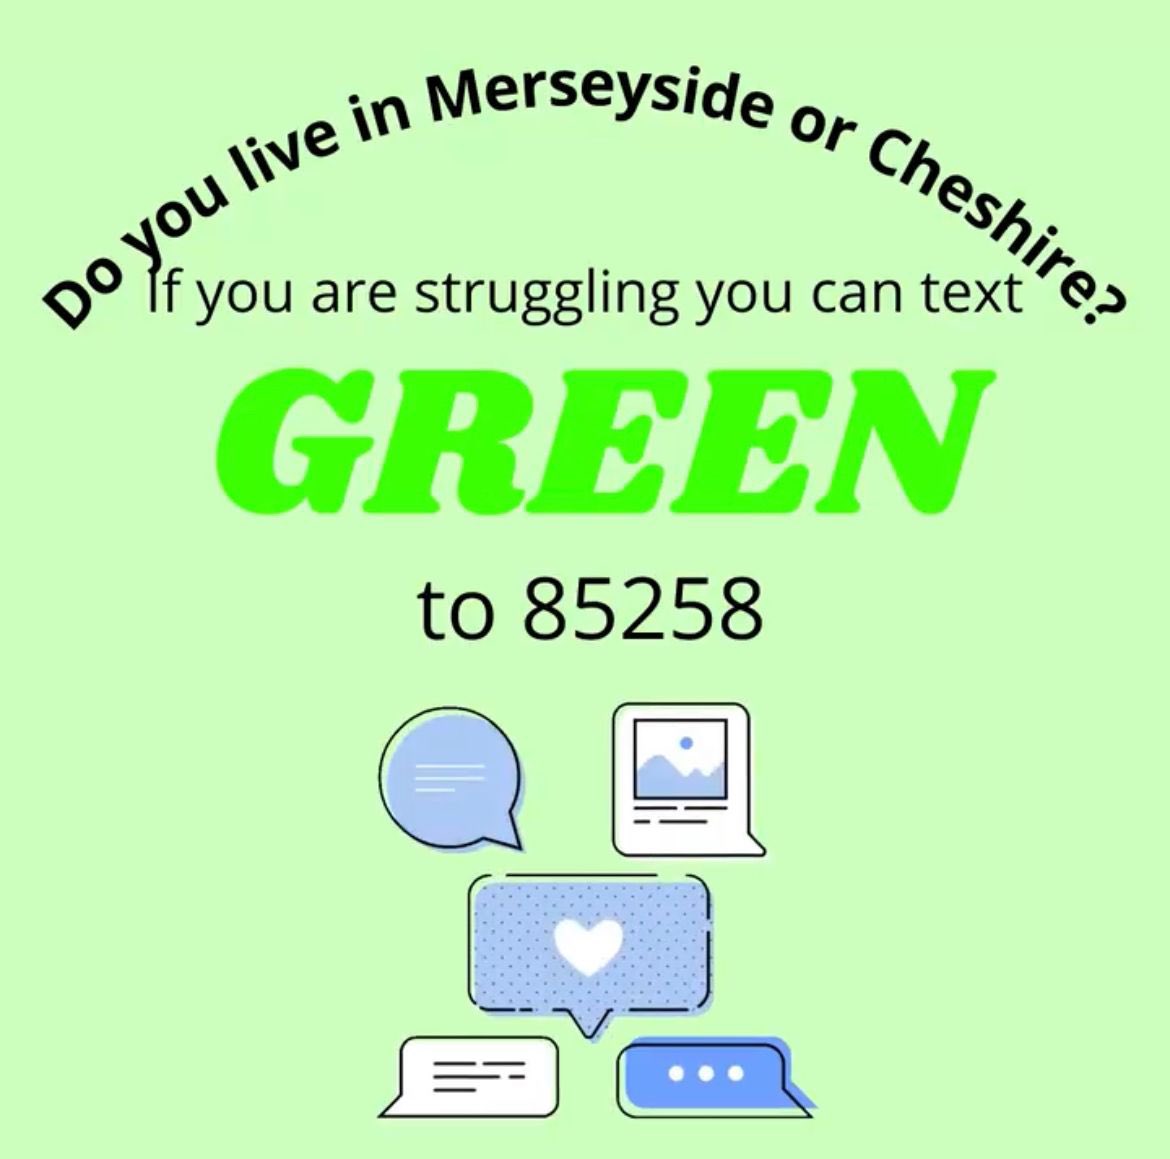 If you are a child or young person struggling and need urgent mental health support, you can contact @GiveUsAShout text the word ‘GREEN’ to 85258 💚 Don’t struggle alone 🧠 @CrisisCareAHH @CamhsSefton @LivCAMHSFYI @mymindfeed @CAMHSNews @Seftoncarers @TheForumAH @FreshCAMHS